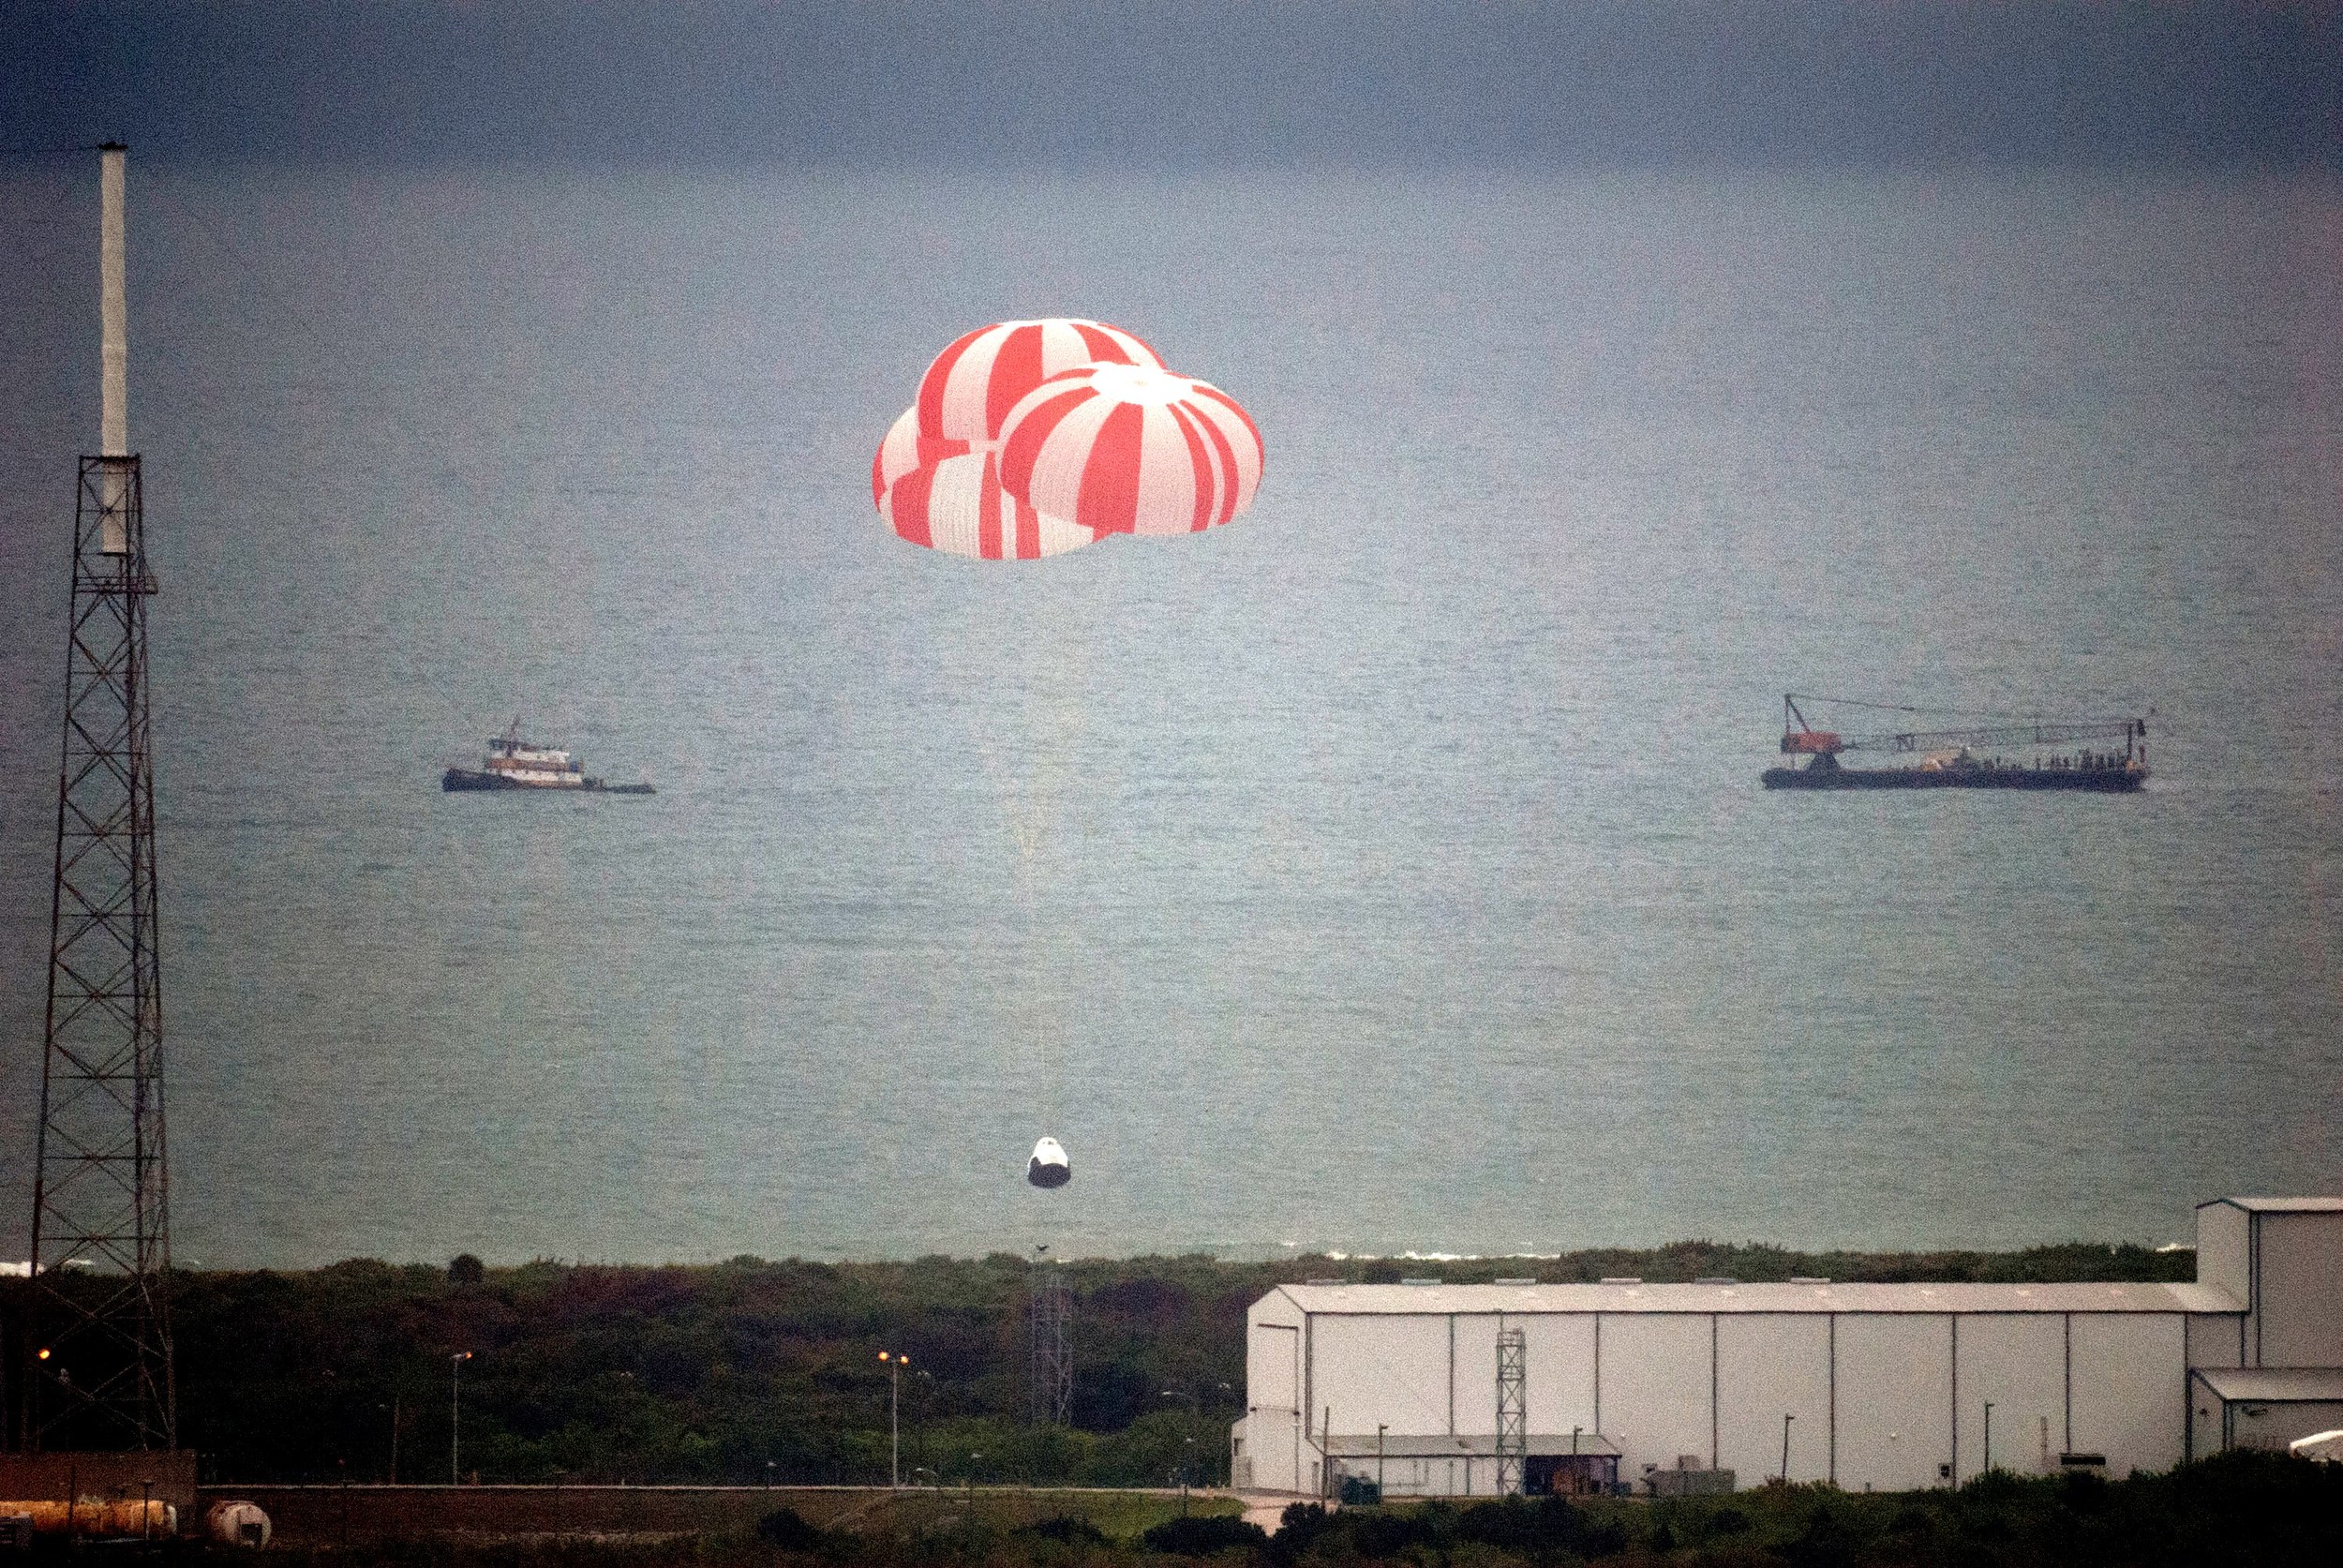  The Crew Dragon capsule parachutes into the ocean after the Pad Abort test. Photo Credit: SpaceX 